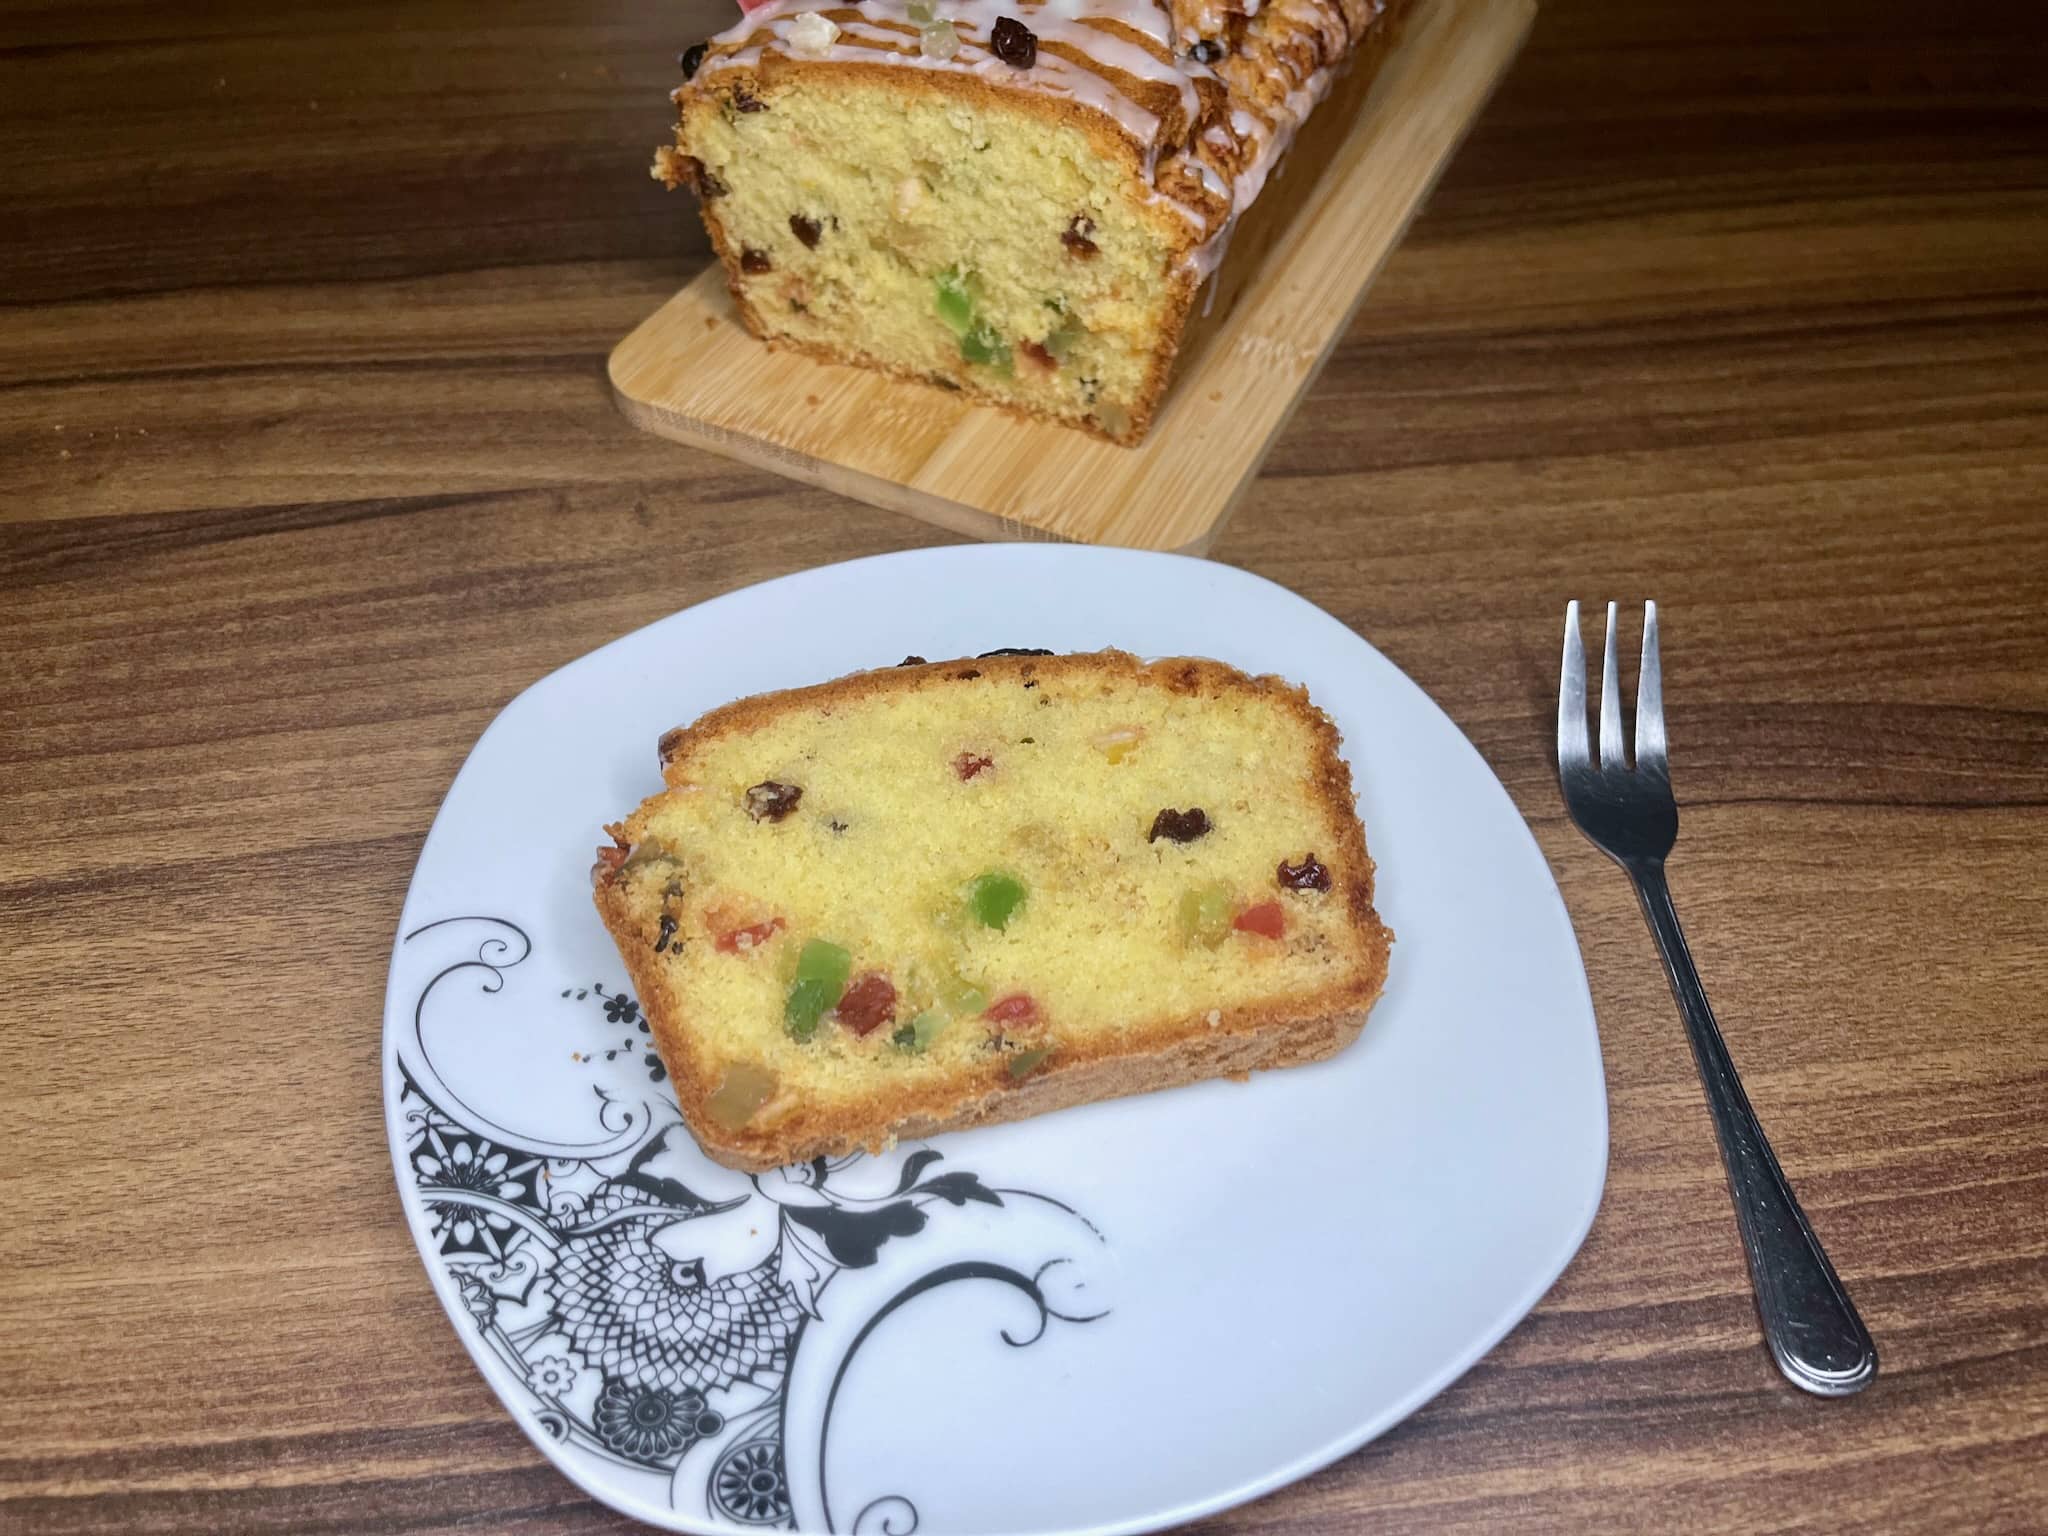 A slice of Candied Fruit Loaf Cake on a plate